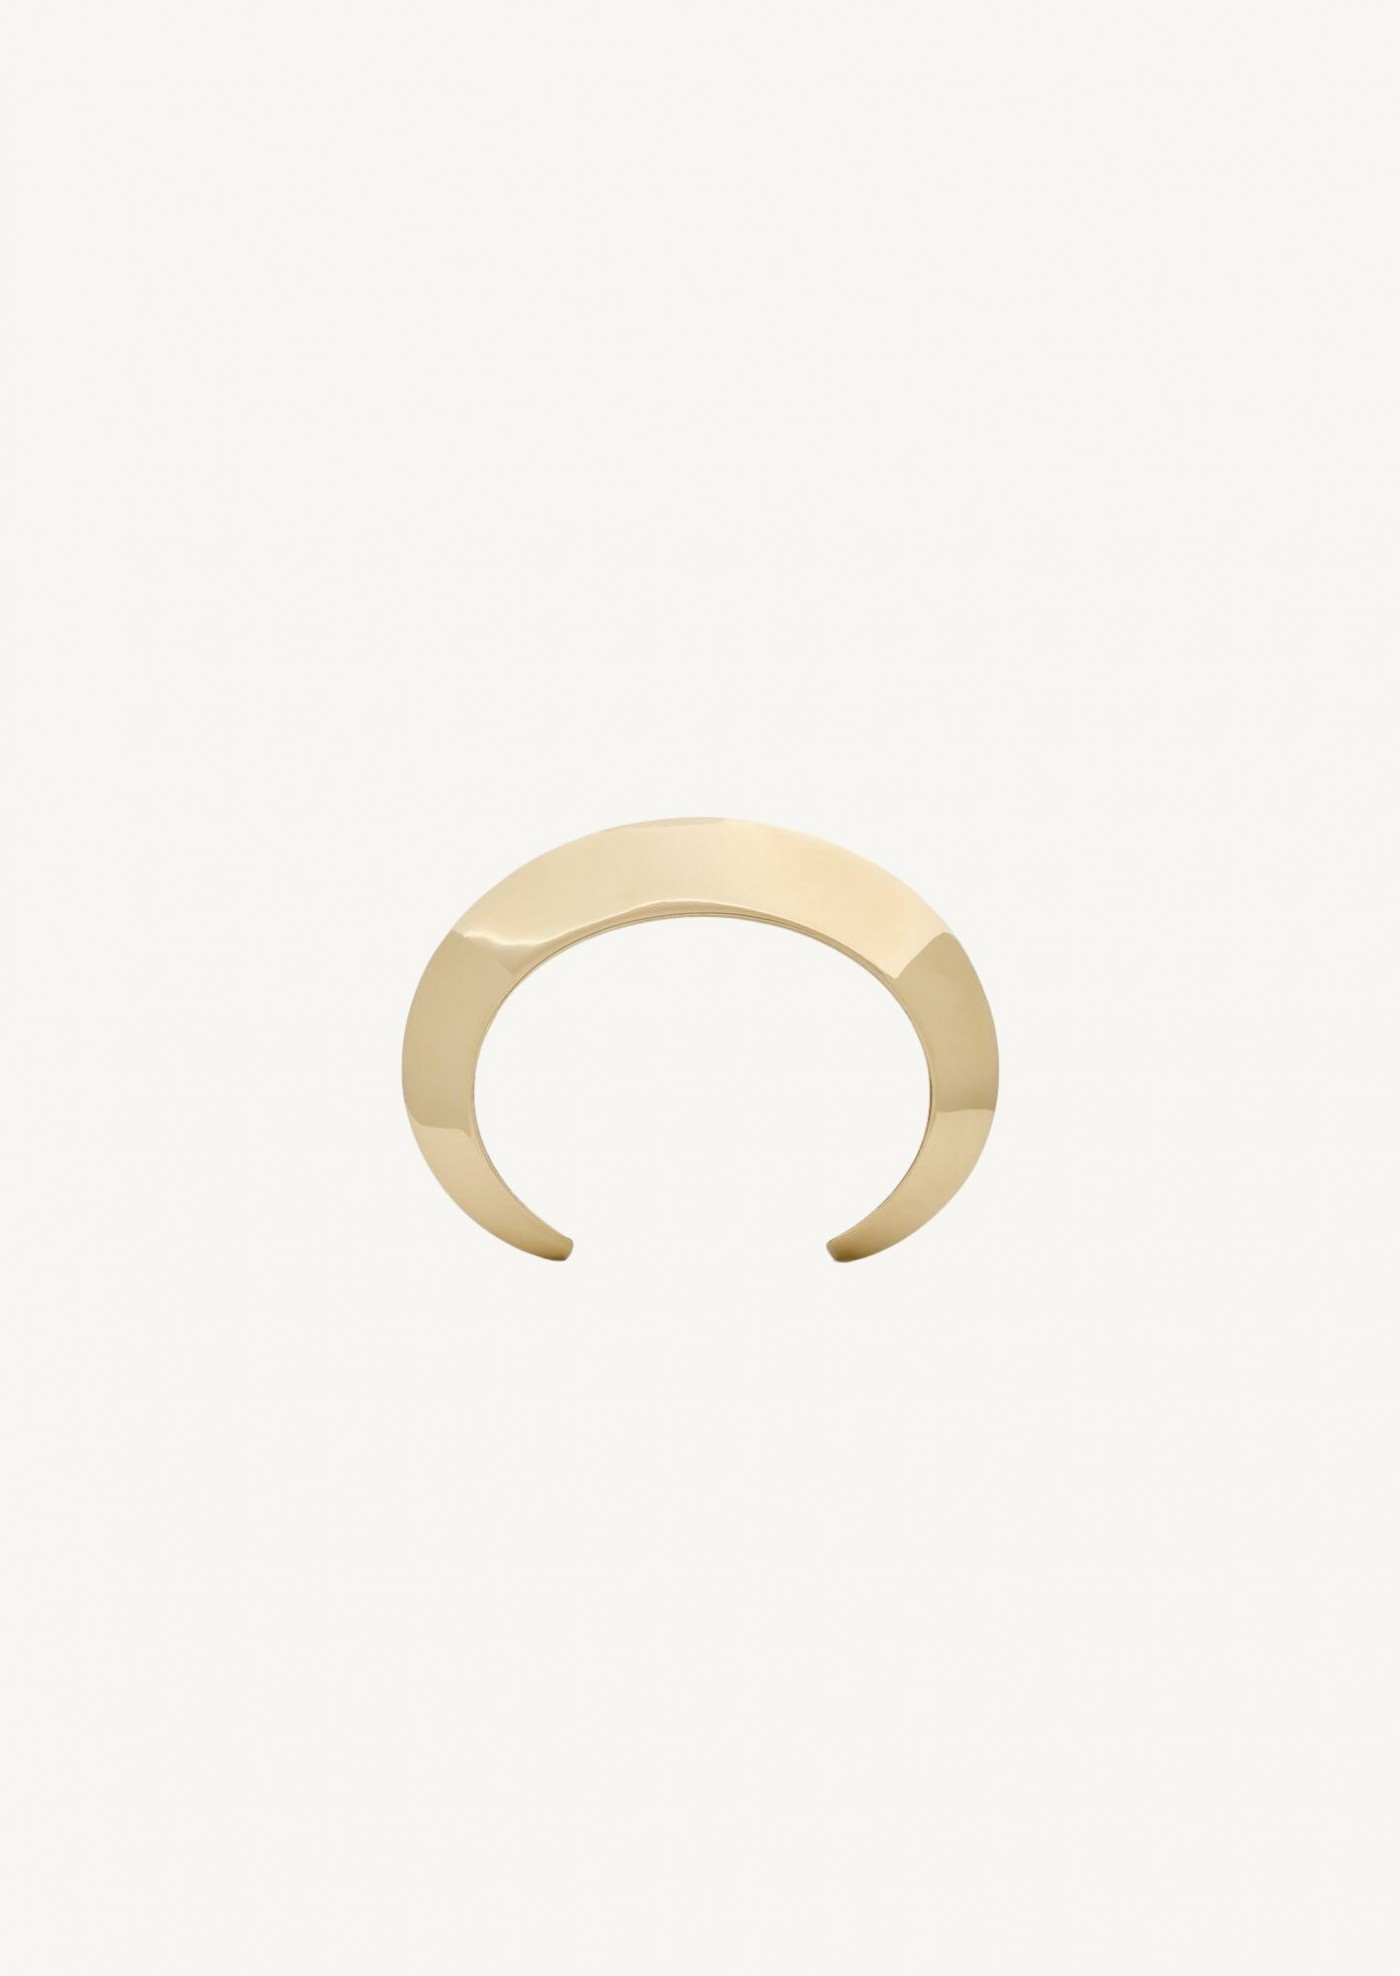 Grooved cuff in gold-plated metal